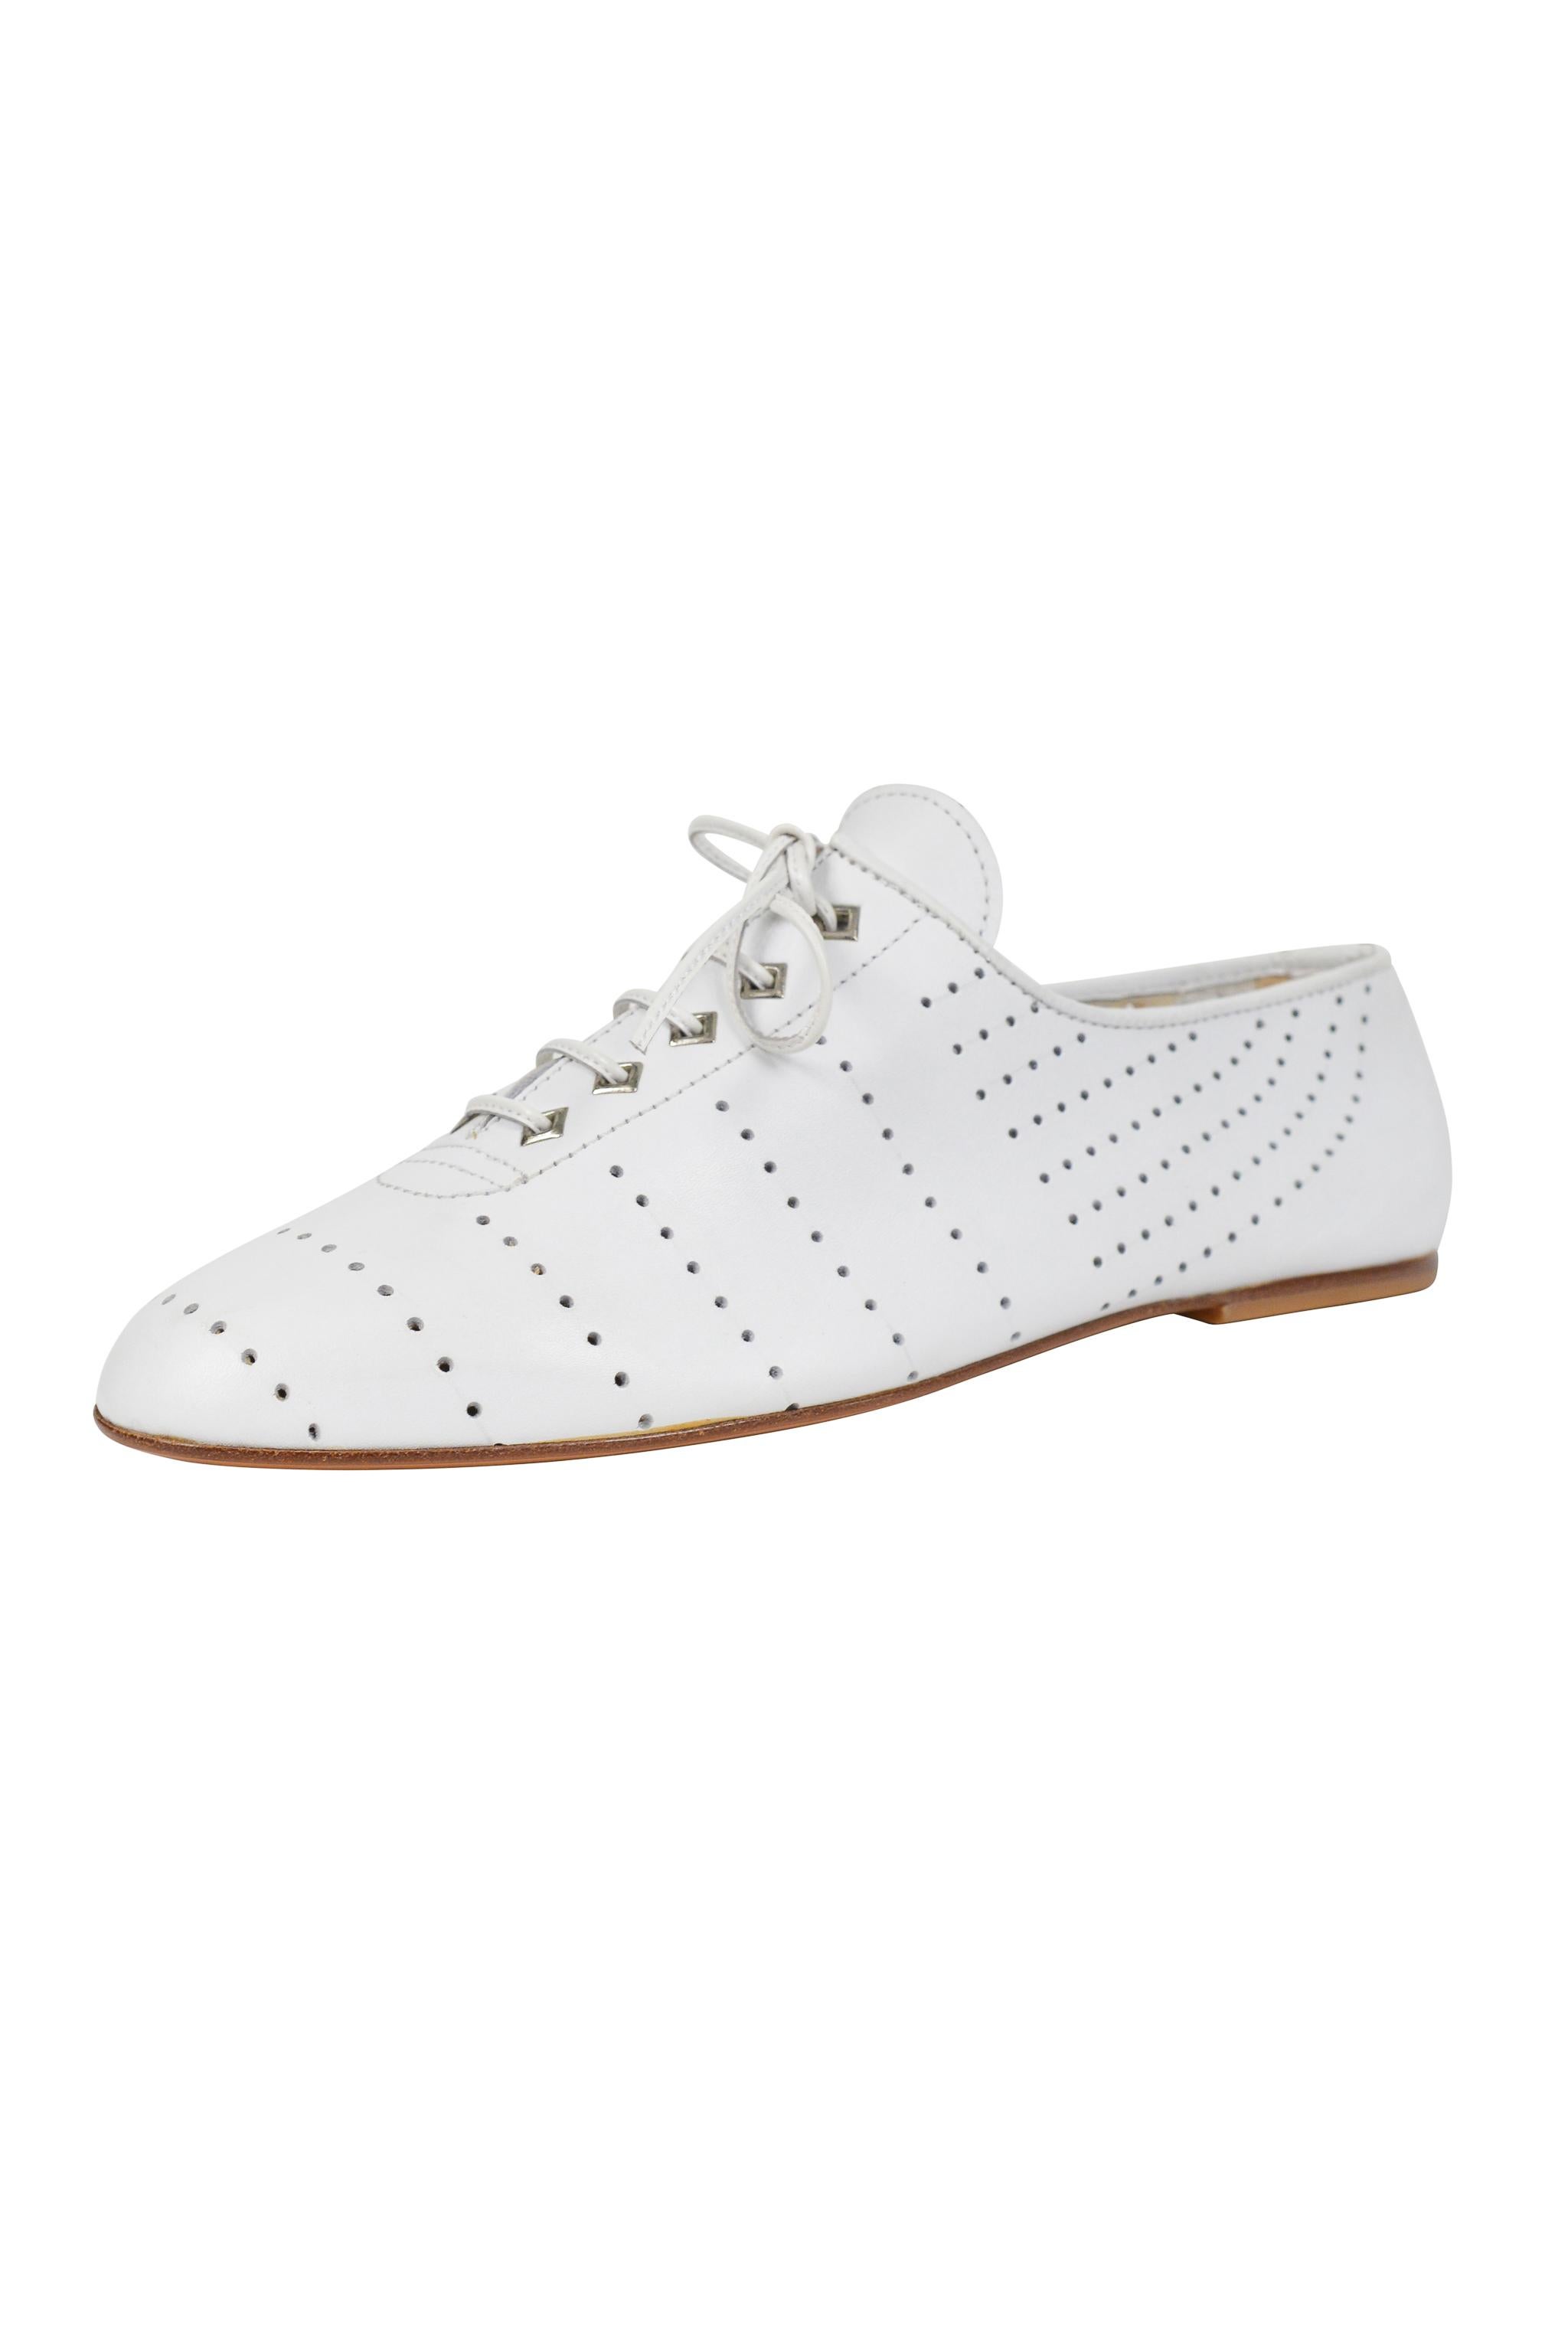 Alaia White Leather Perforated Brogue Oxford Shoes 80S-90S In Excellent Condition For Sale In Los Angeles, CA